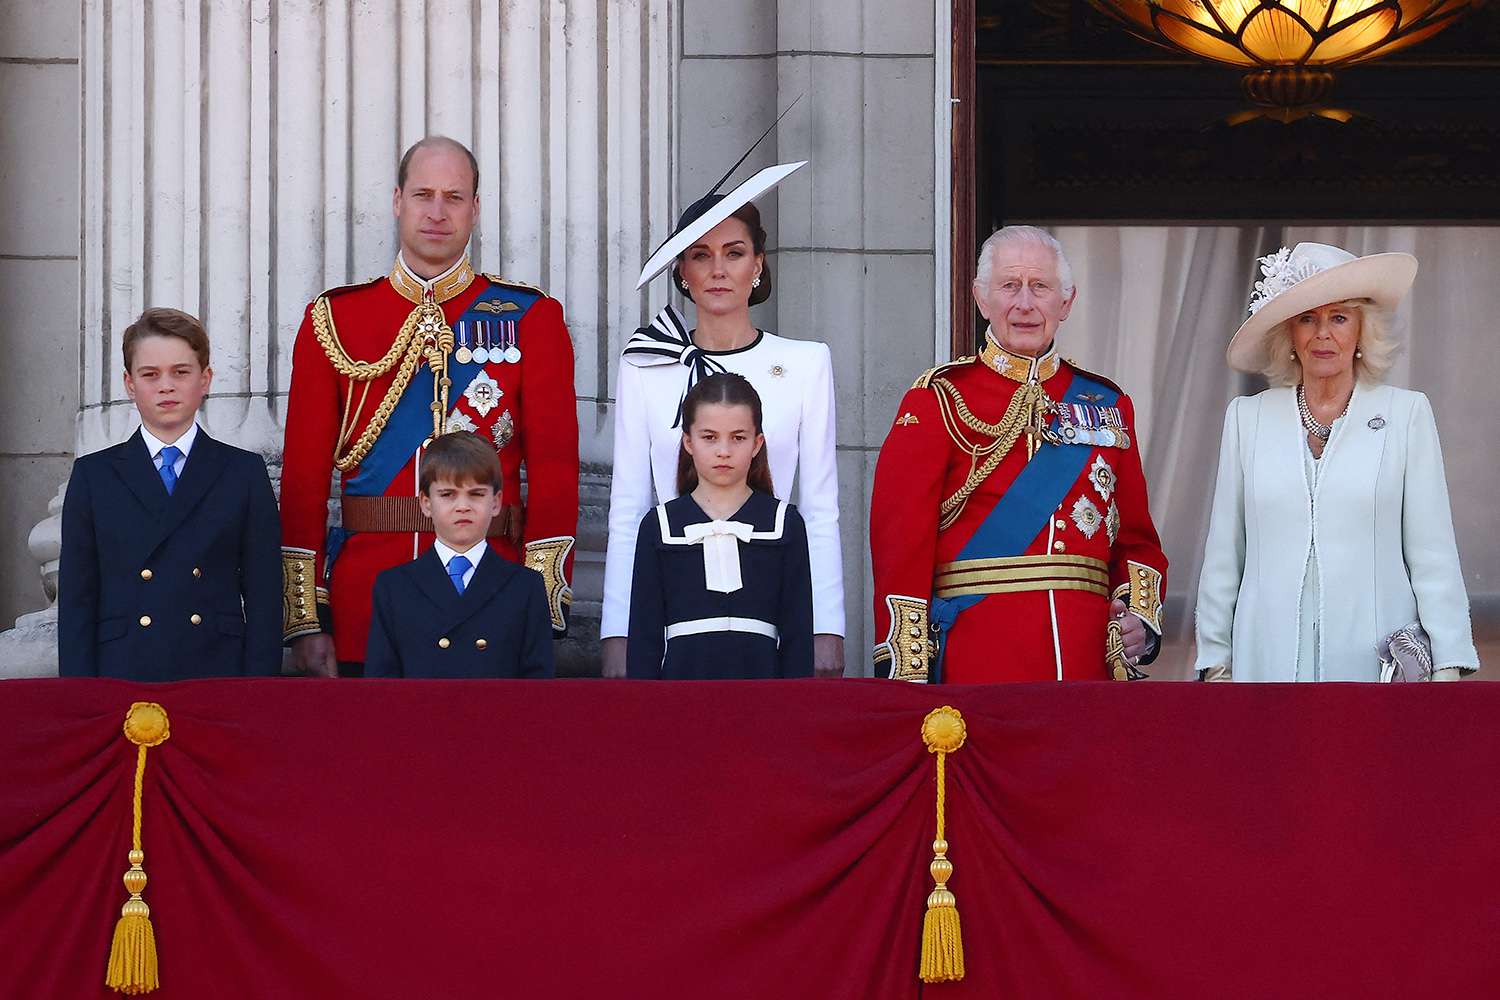 Prince George of Wales, Britain's Prince William, Prince of Wales, Britain's Prince Louis of Wales, Britain's Catherine, Princess of Wales, Britain's Princess Charlotte of Wales, Britain's King Charles III and Britain's Queen Camilla stand on the balcony of Buckingham Palace after attending the King's Birthday Parade "Trooping the Colour" in London 